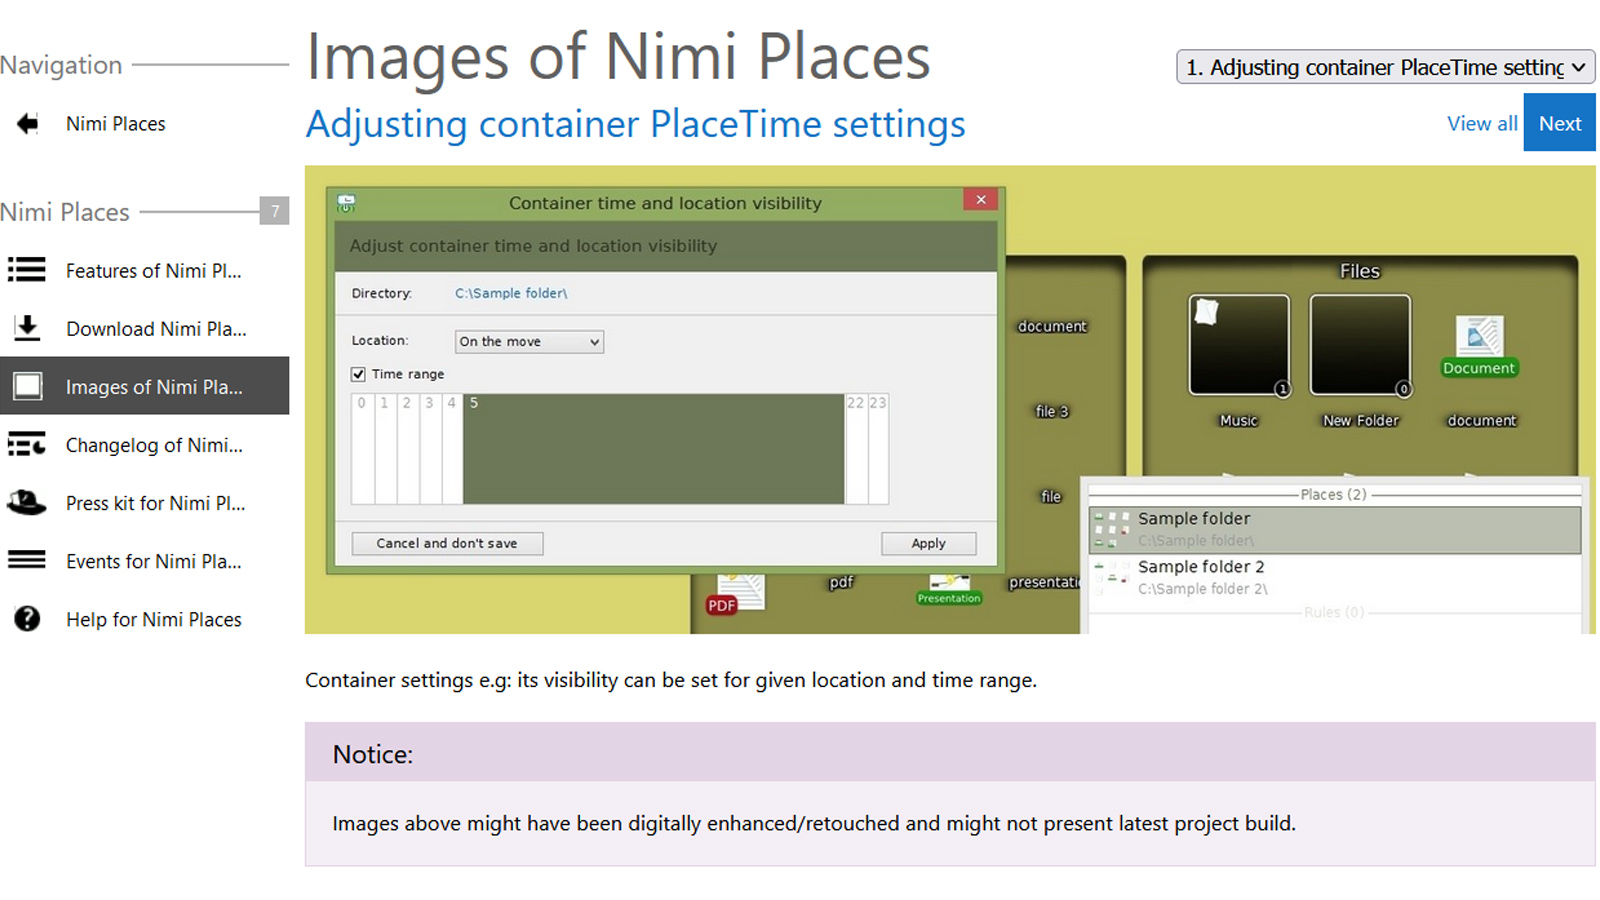 Find detailed information about Nimi Places